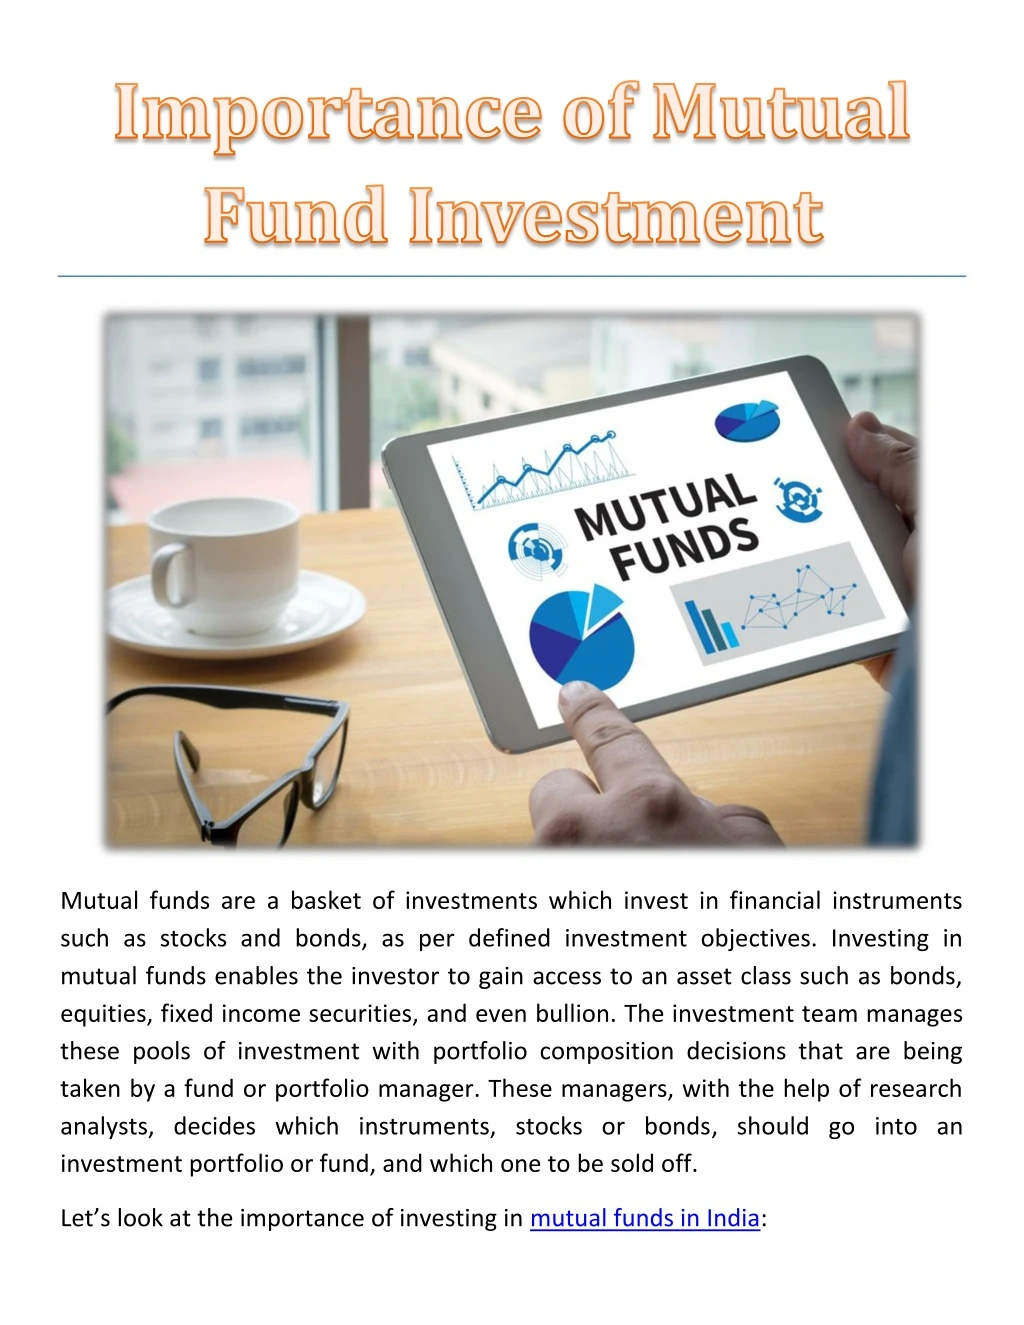 mutual funds are a basket of investments which